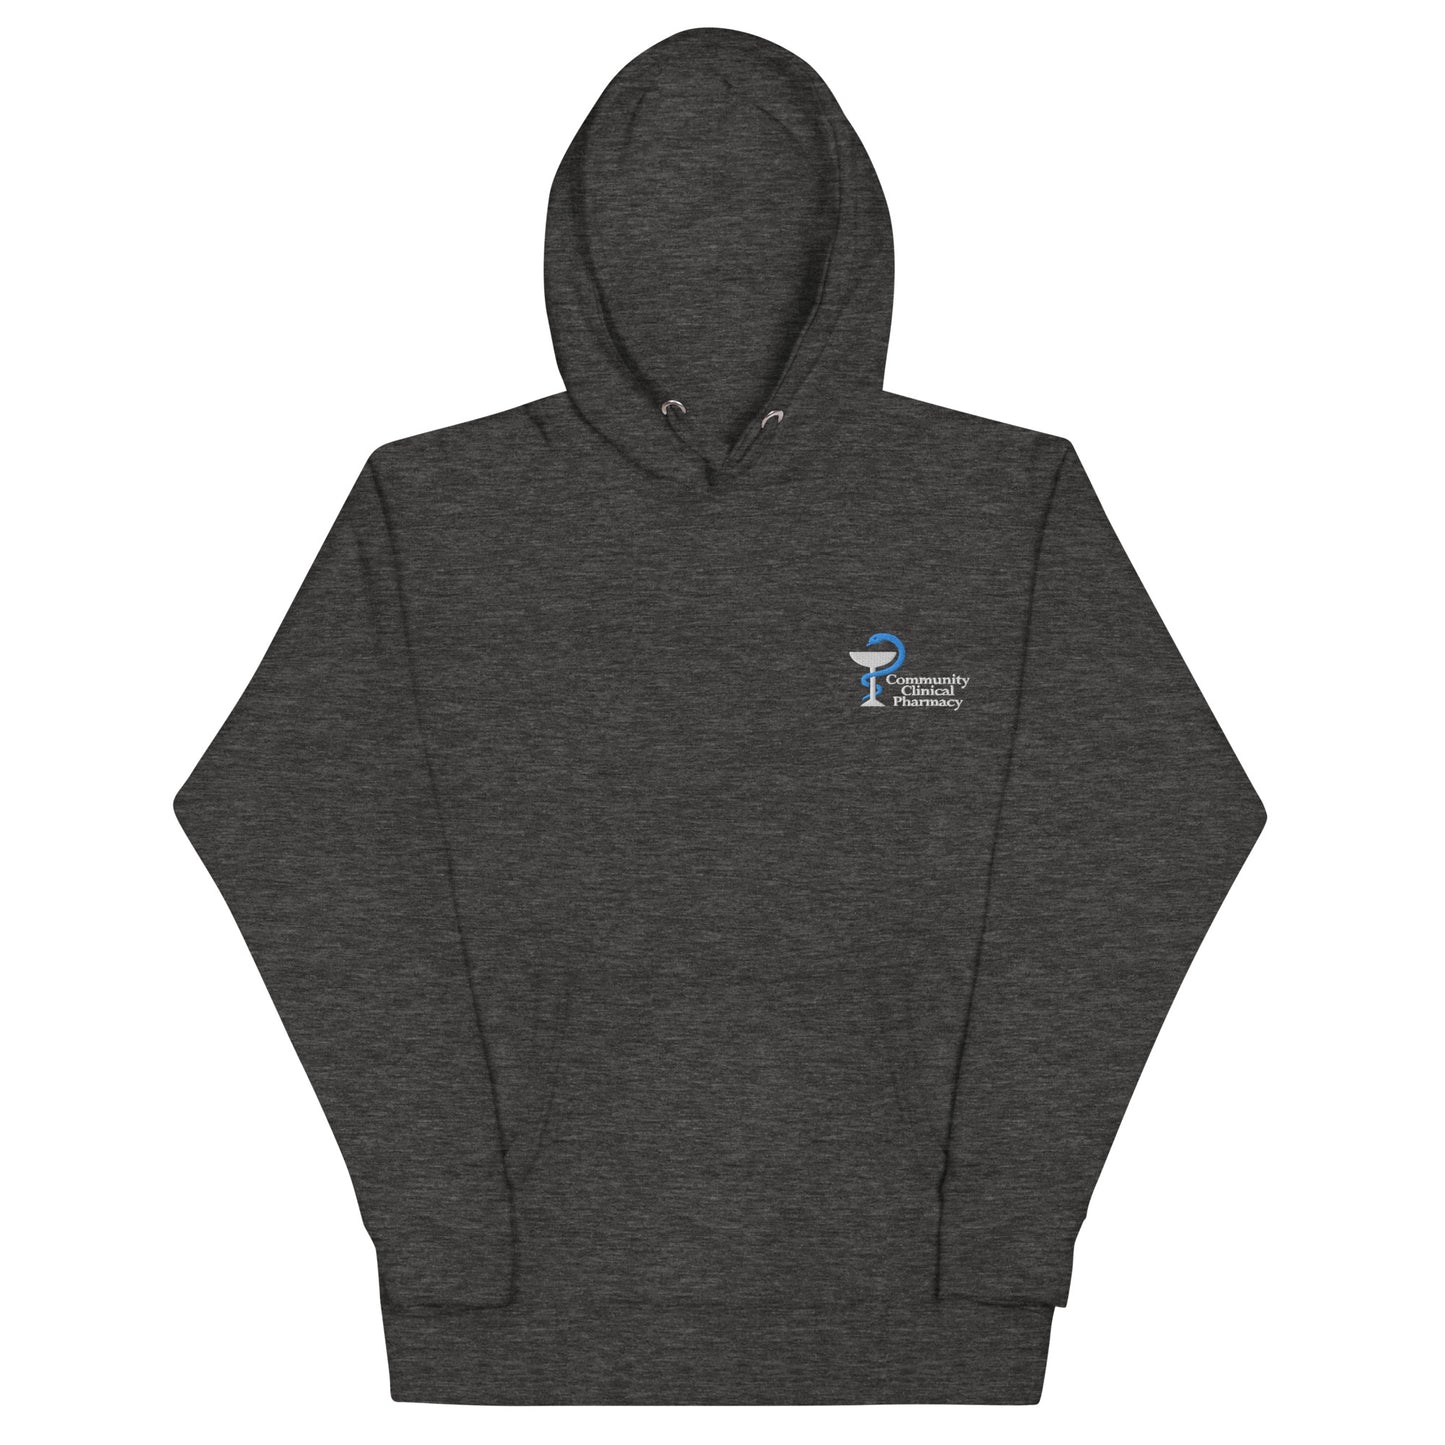 Unisex Premium Hoodie (fitted cut) - Community Clinical Pharmacy